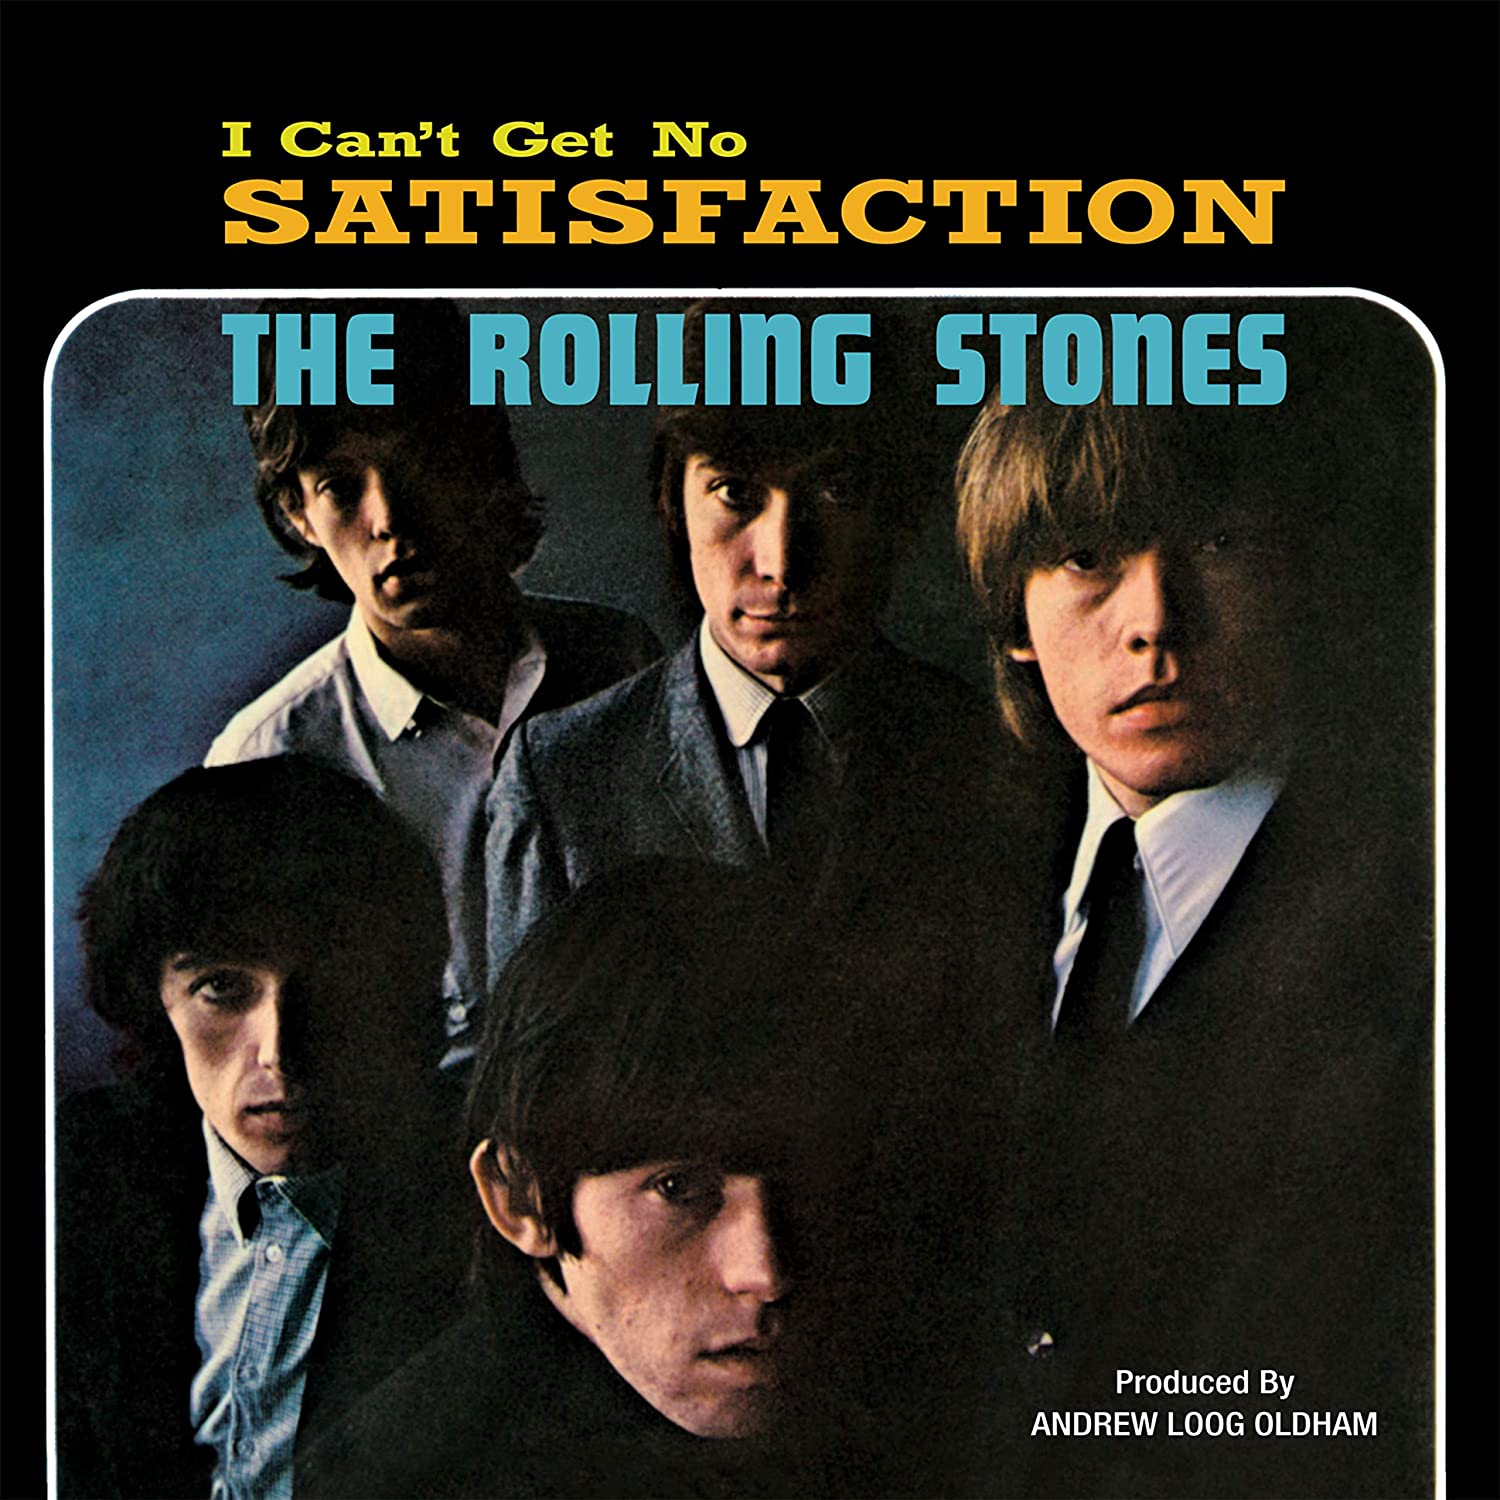 THE ROLLING STONES - (I CAN'T GET NO) SATISFACTION - 55TH ANNIVERSARY EDITION EMERALD VINYL LP - Wah Wah Records